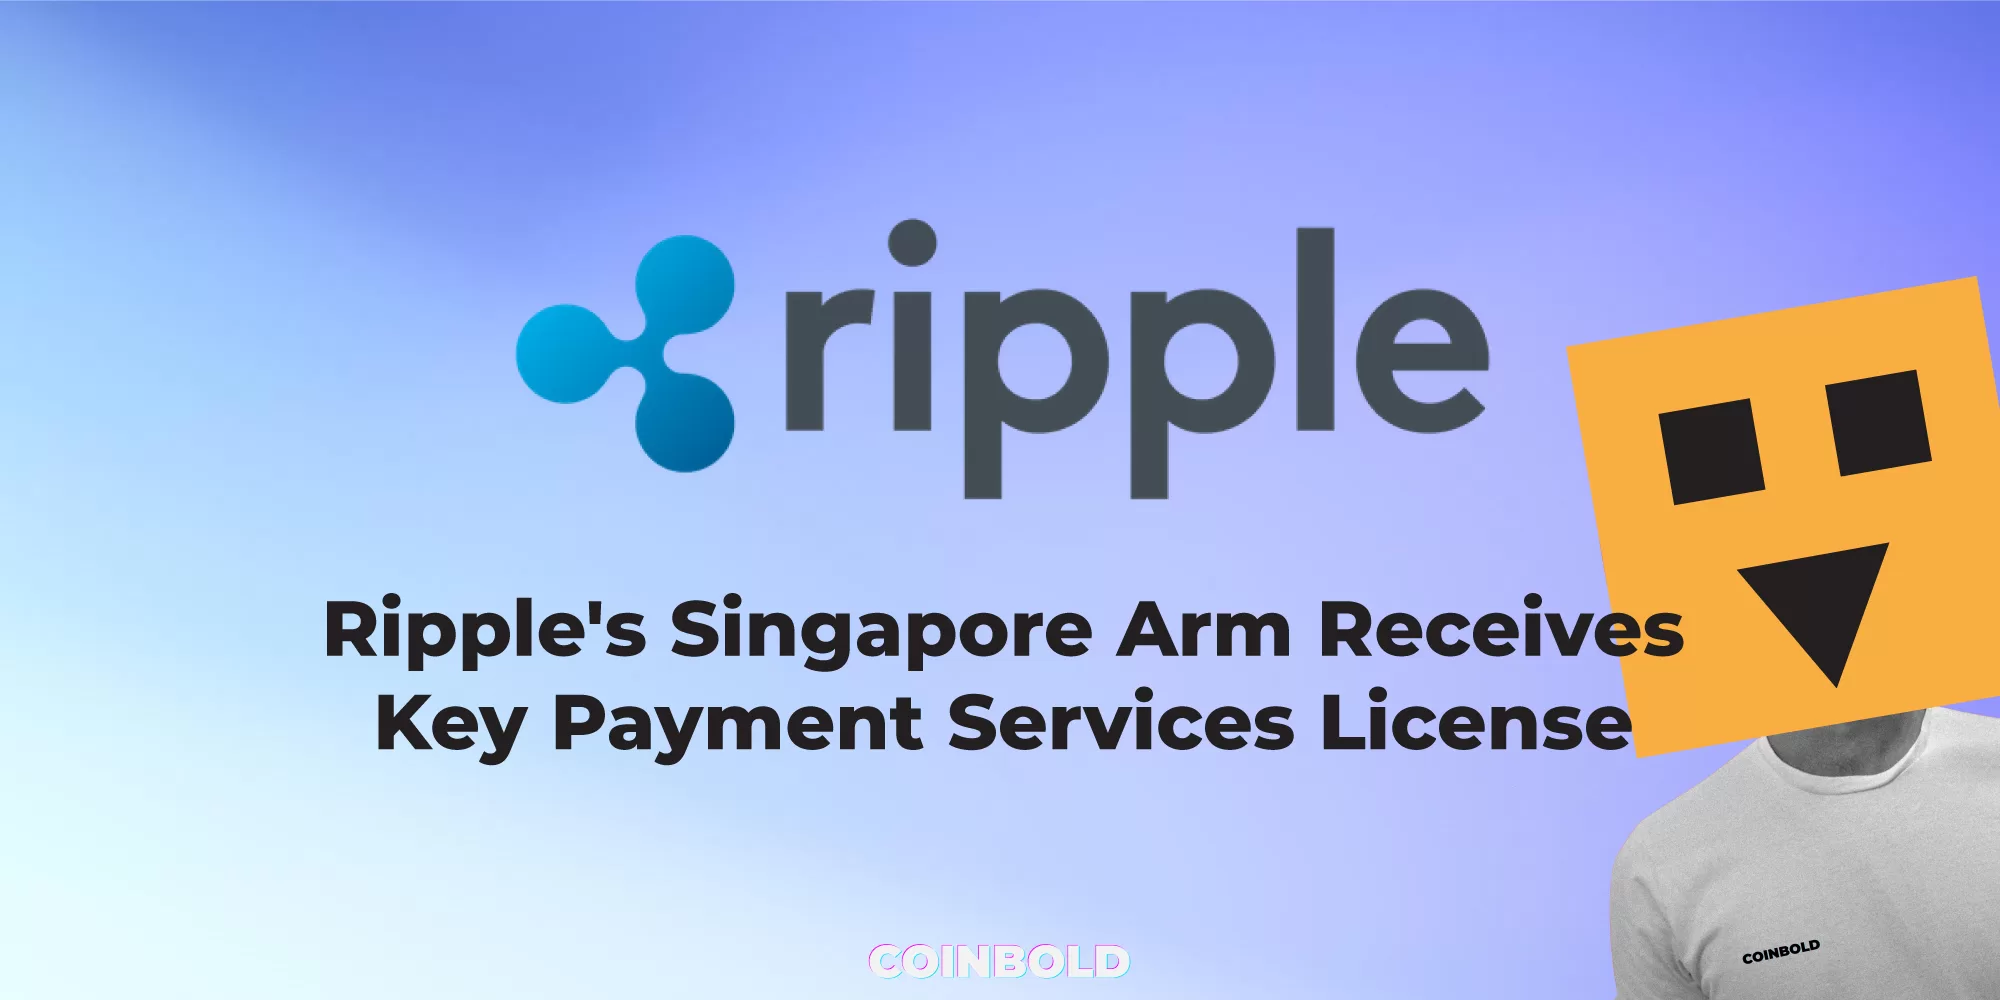 Ripple's Singapore Arm Receives Key Payment Services License